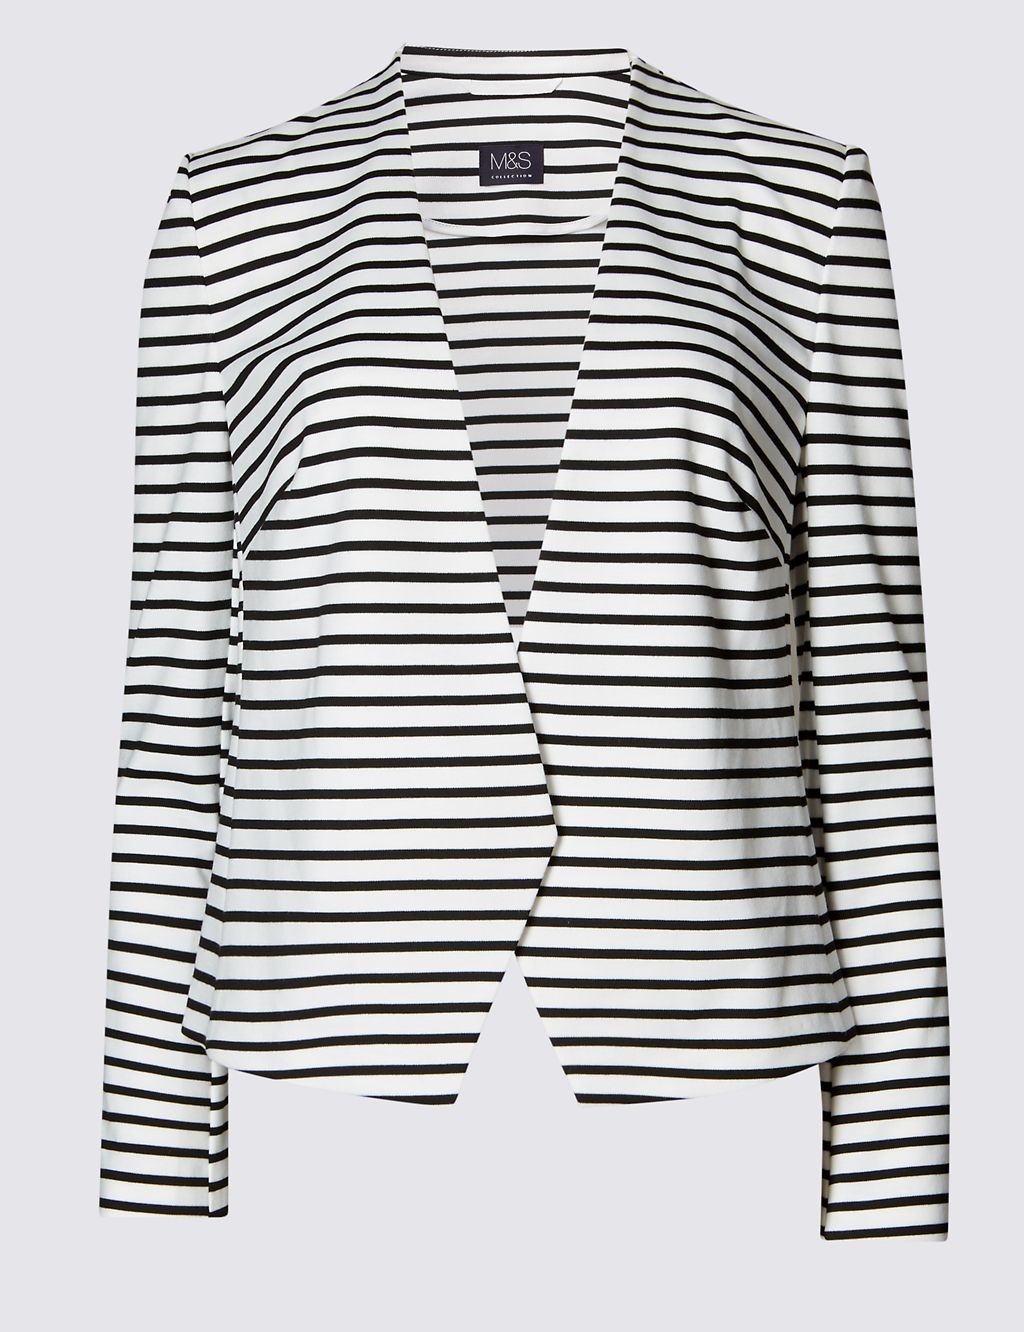 Striped Open Front Jacket 1 of 4